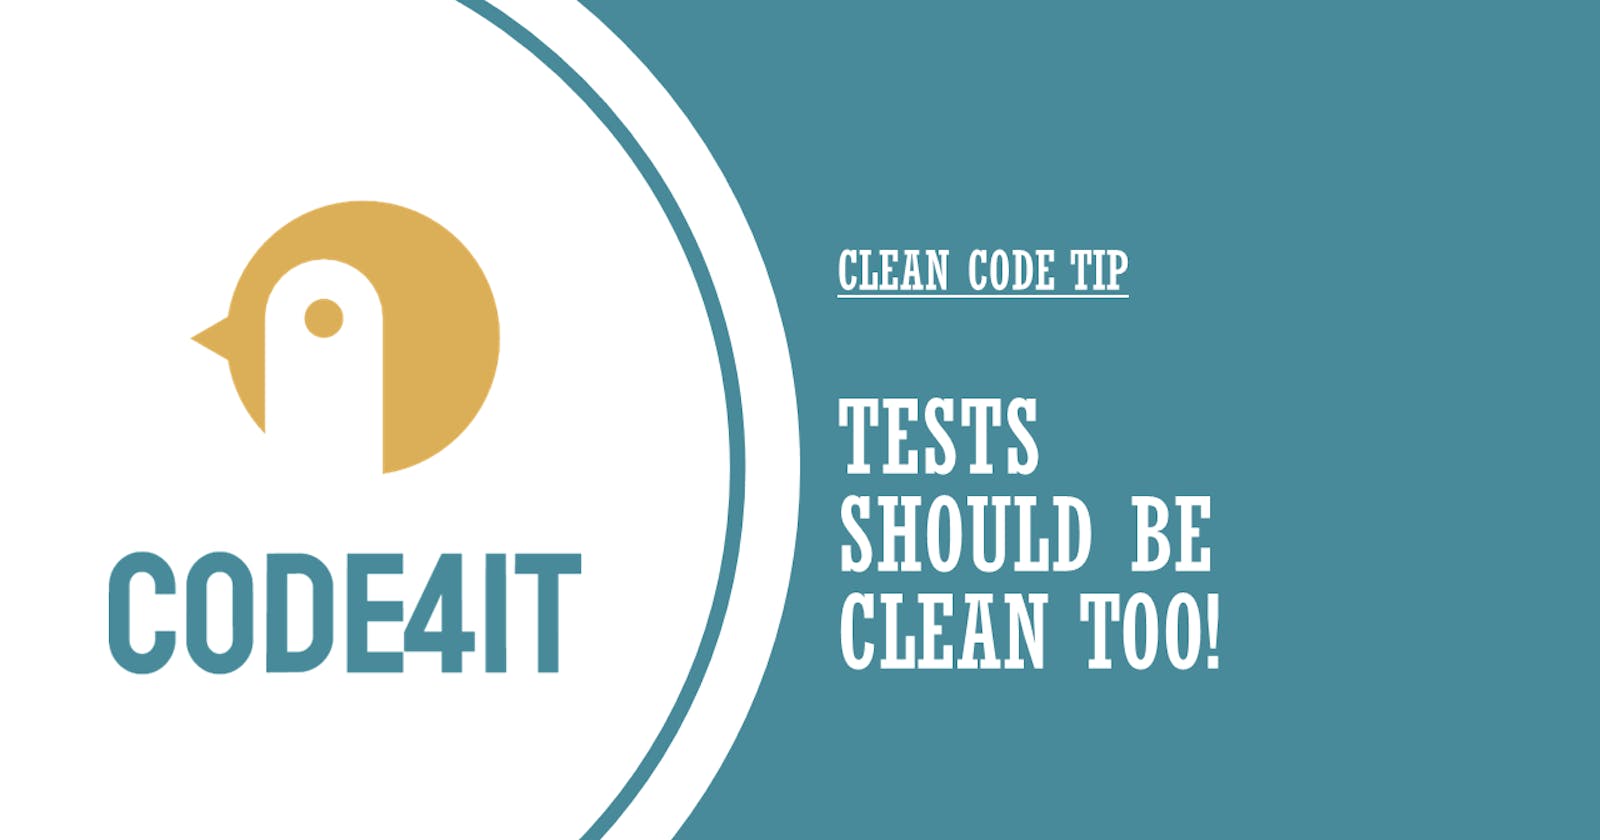 Clean Code Tip: Tests should be even more well-written than production code